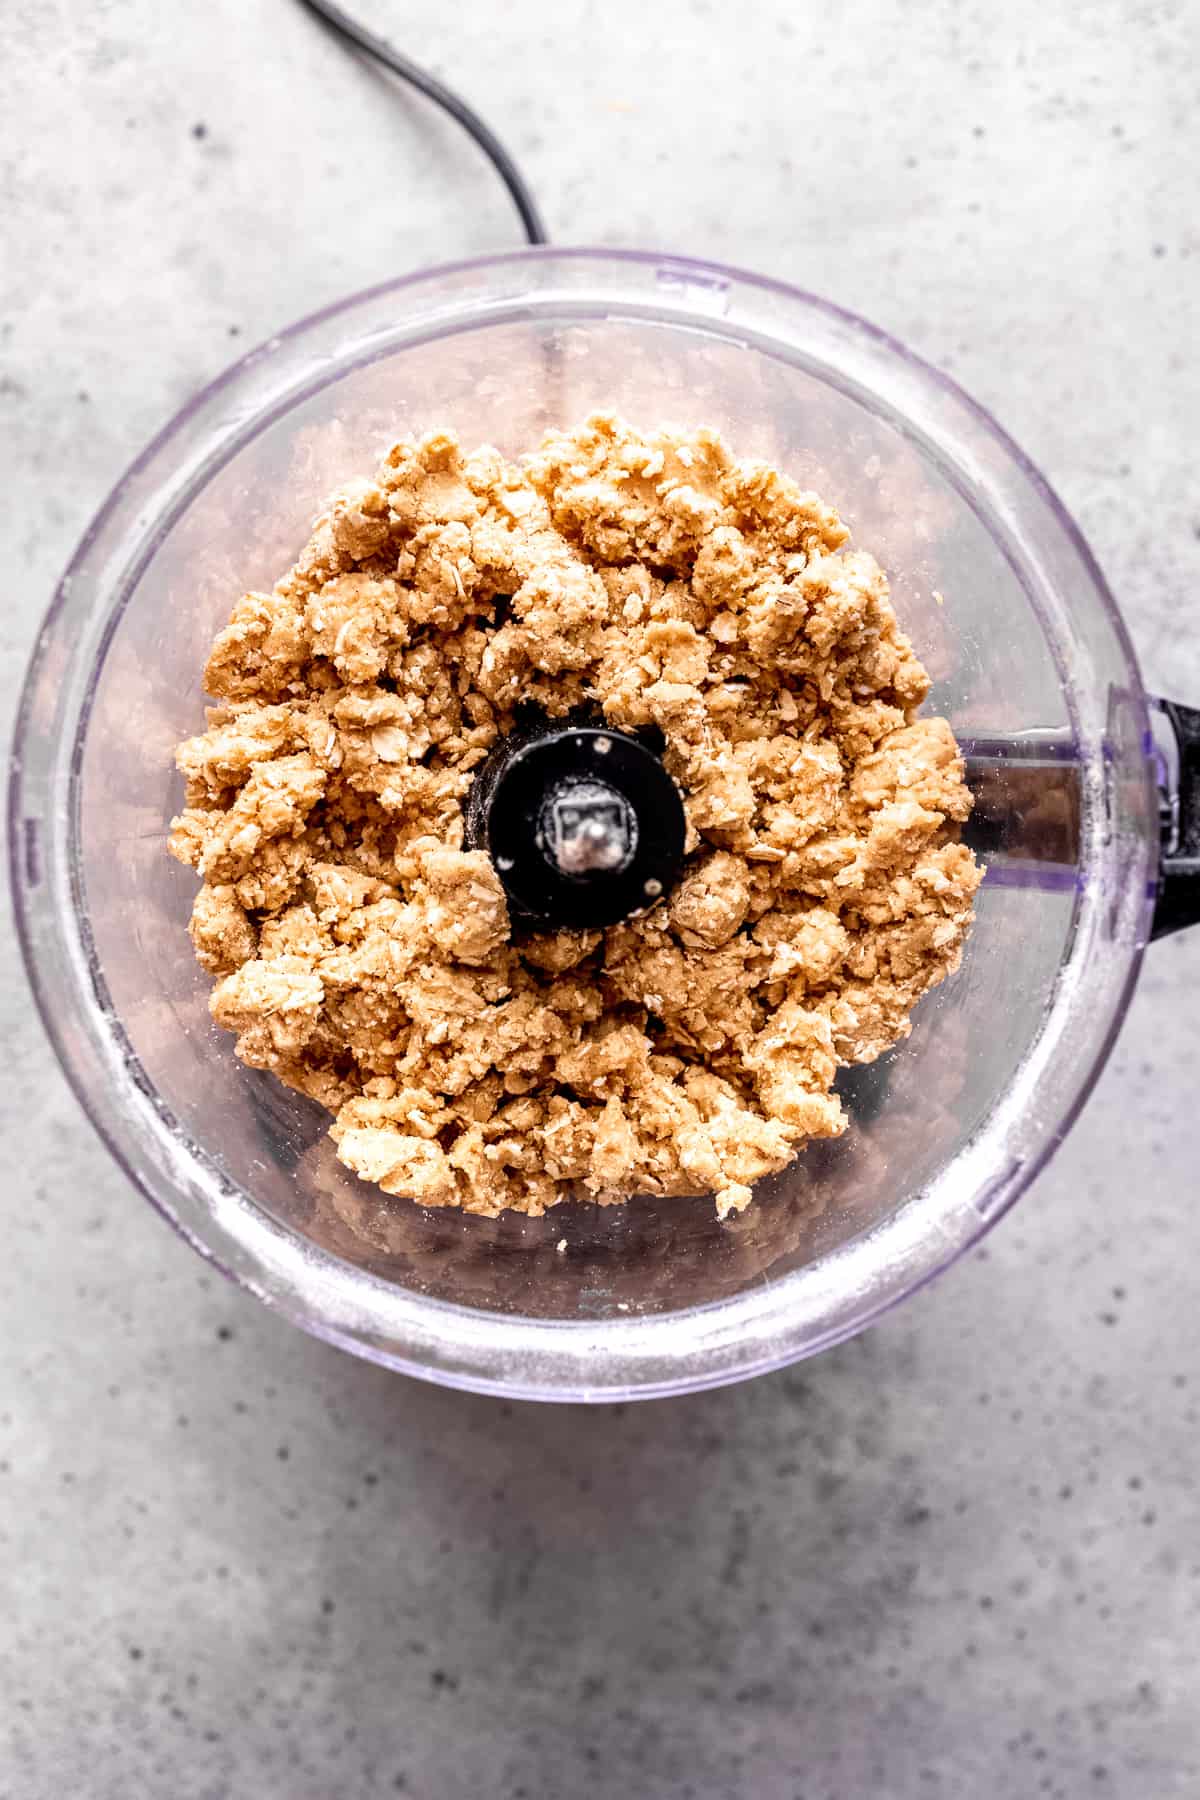 Oat and butter in a food processor for making crumble topping.